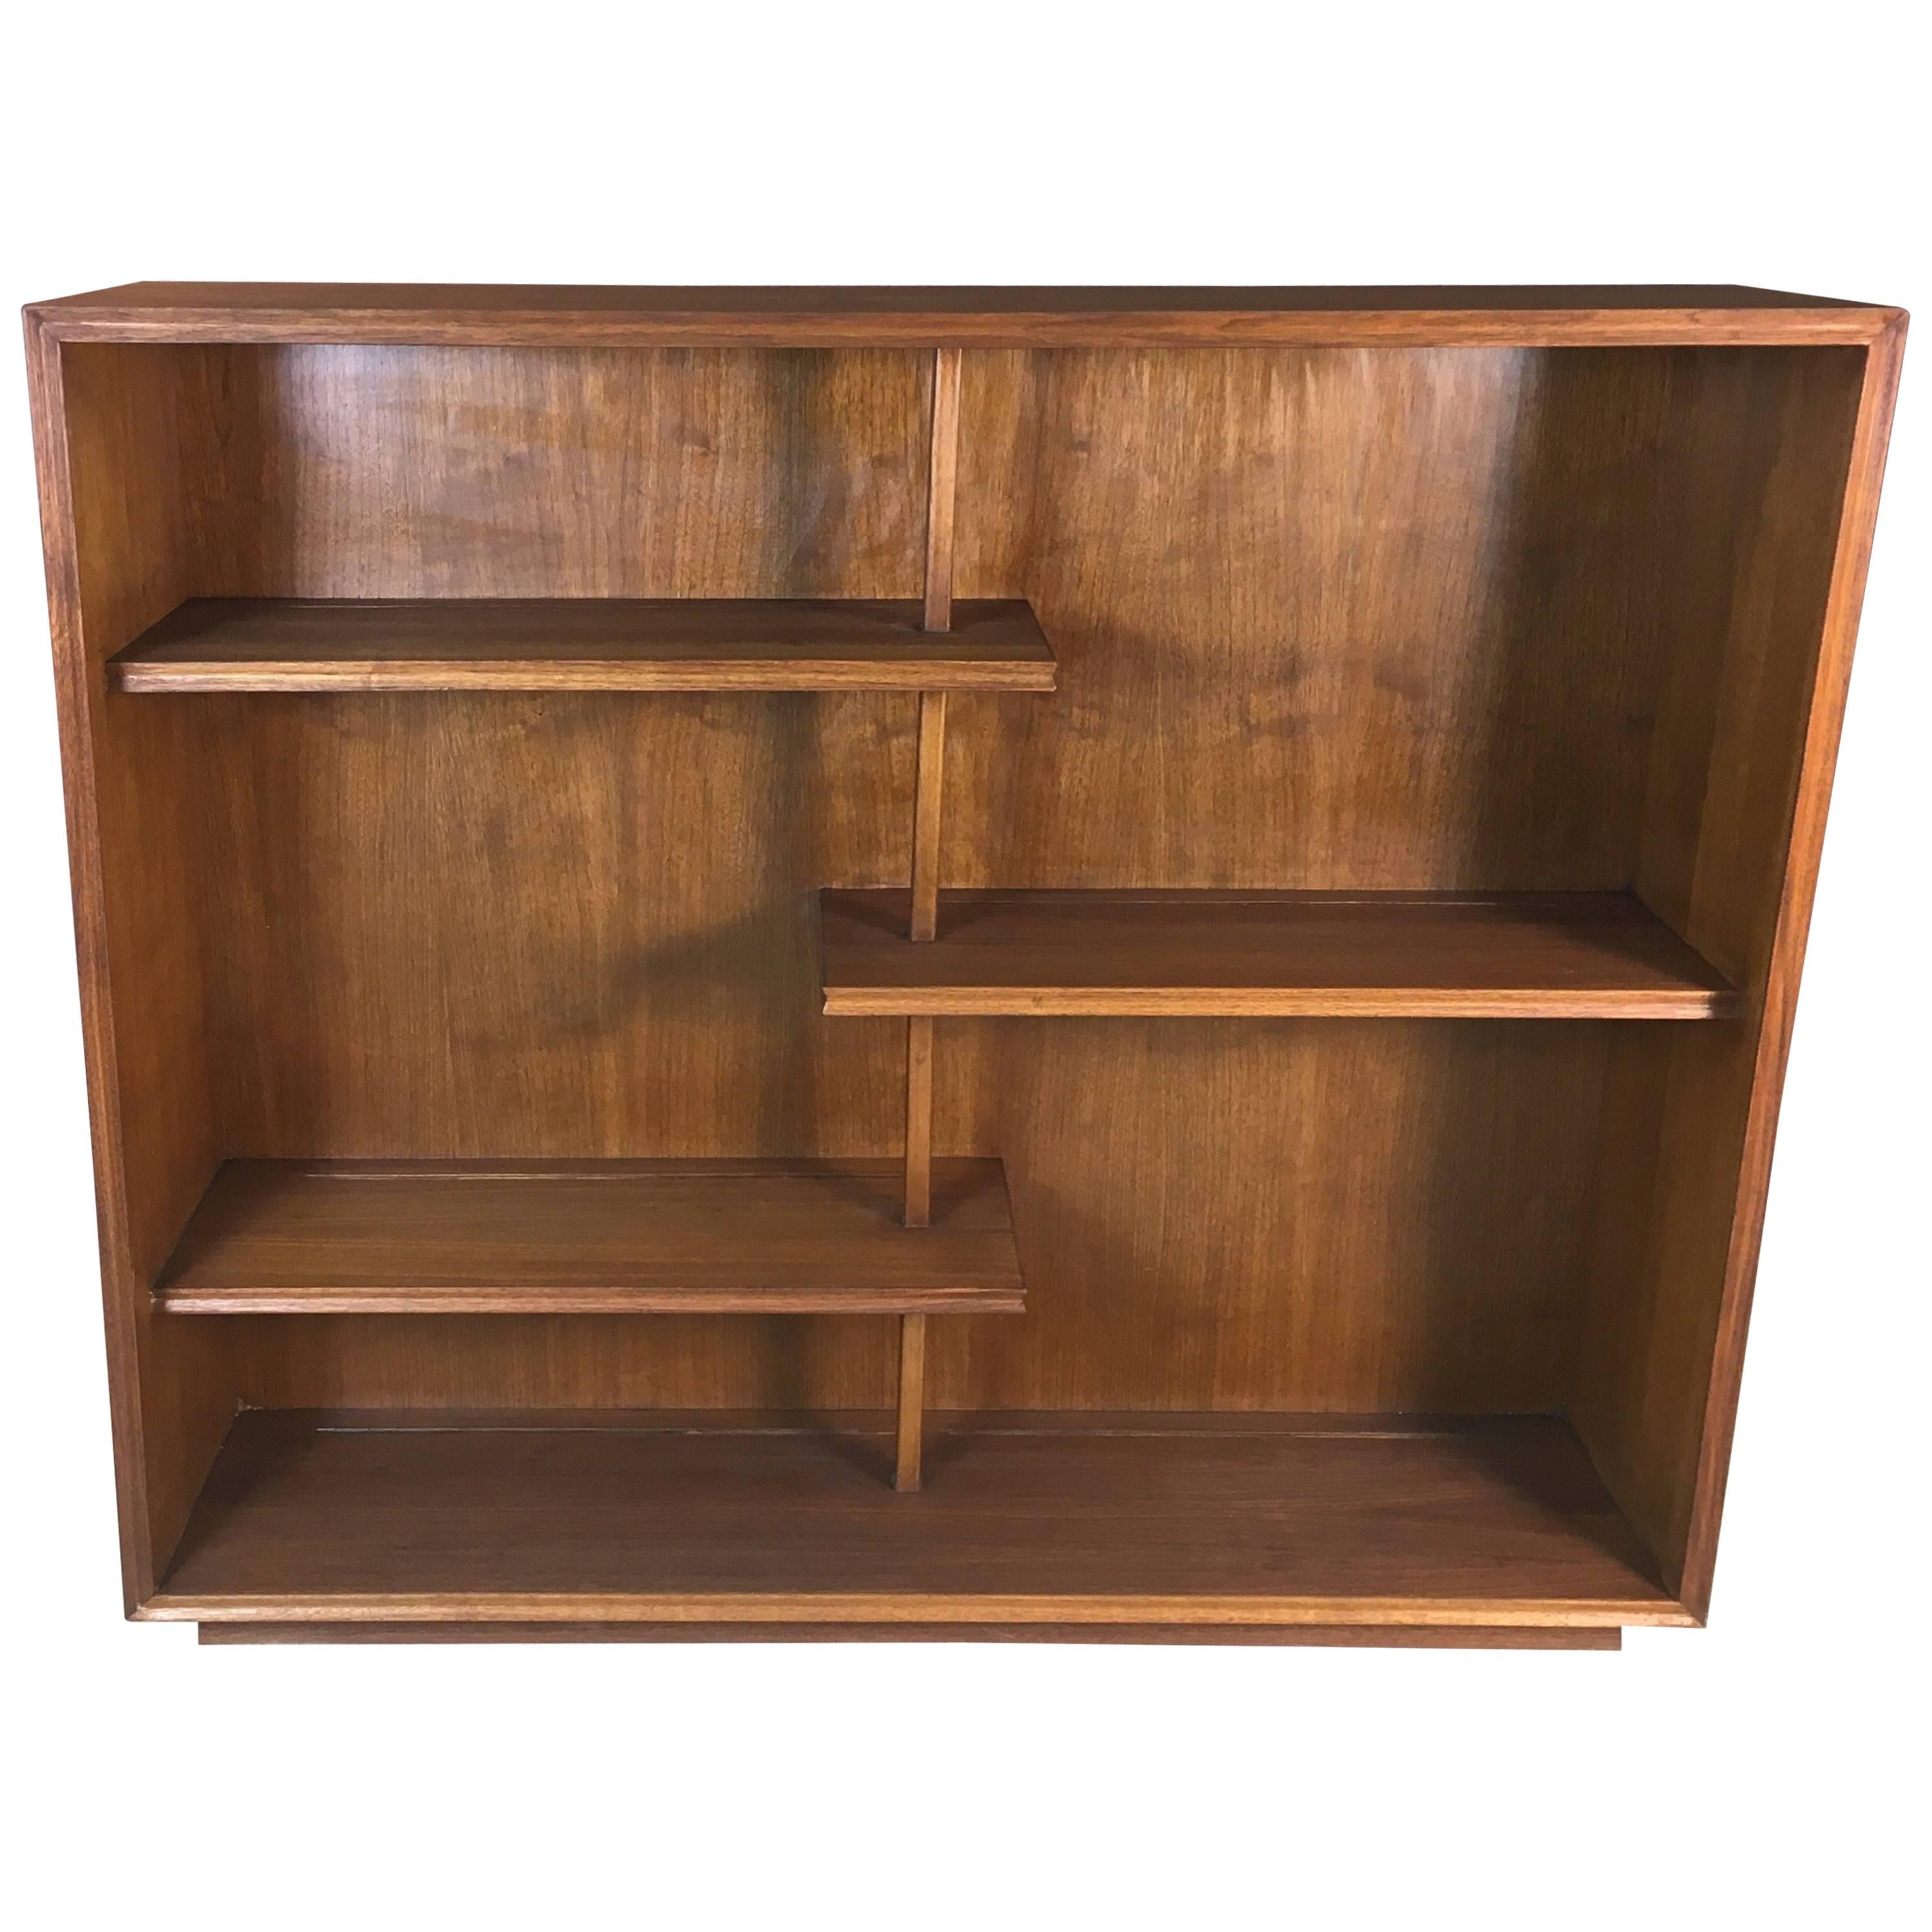 Mid-20th Century Walnut Wood Display Shelving Unit For Sale